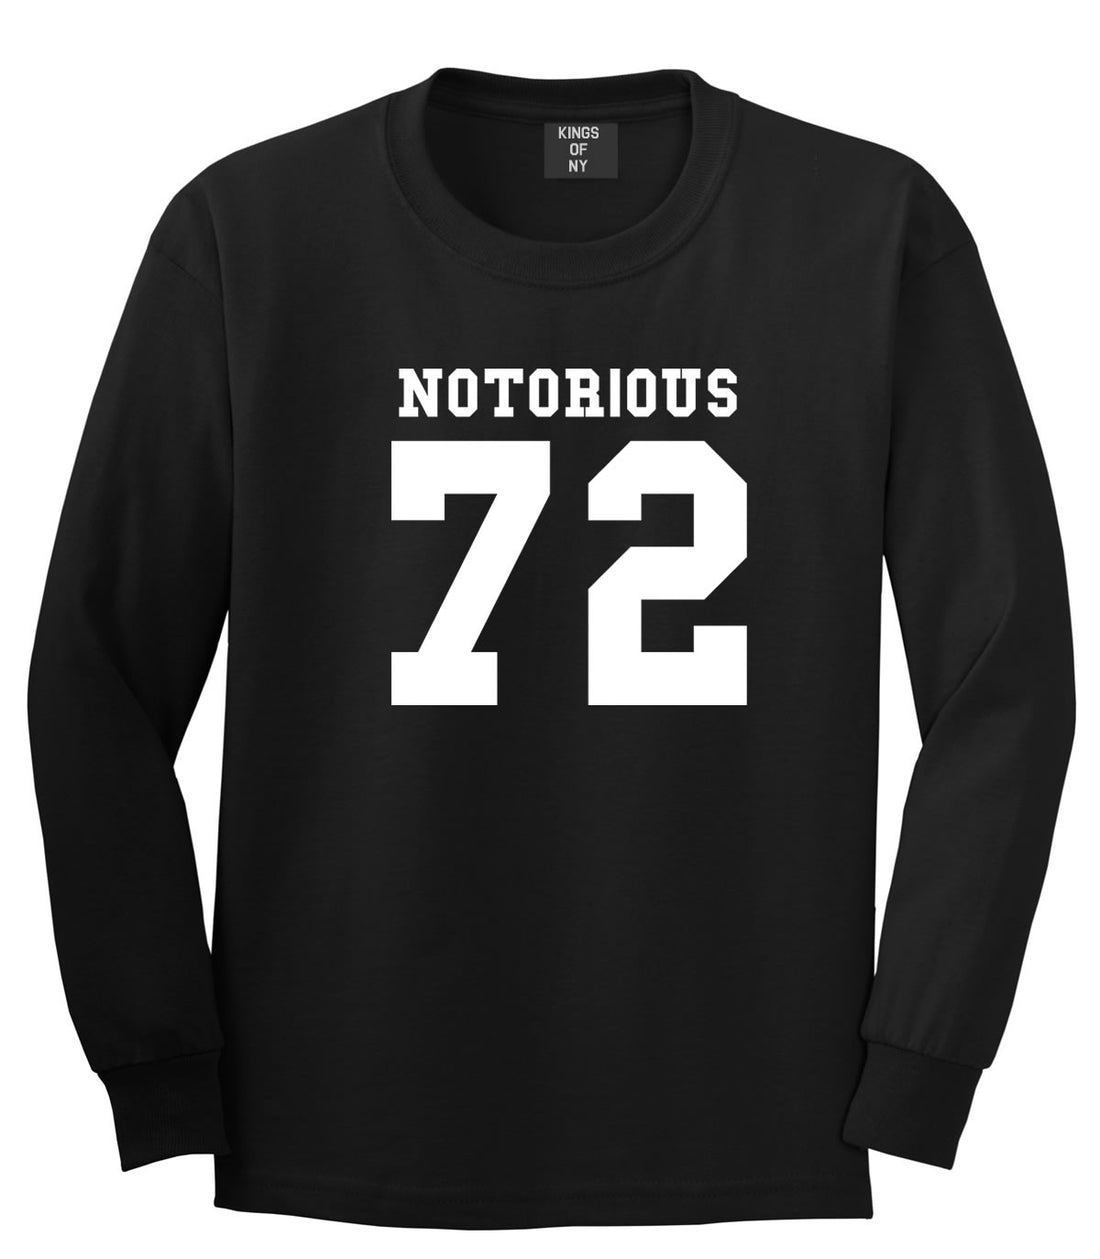 Notorious 72 Team Long Sleeve T-Shirt in Black by Kings Of NY